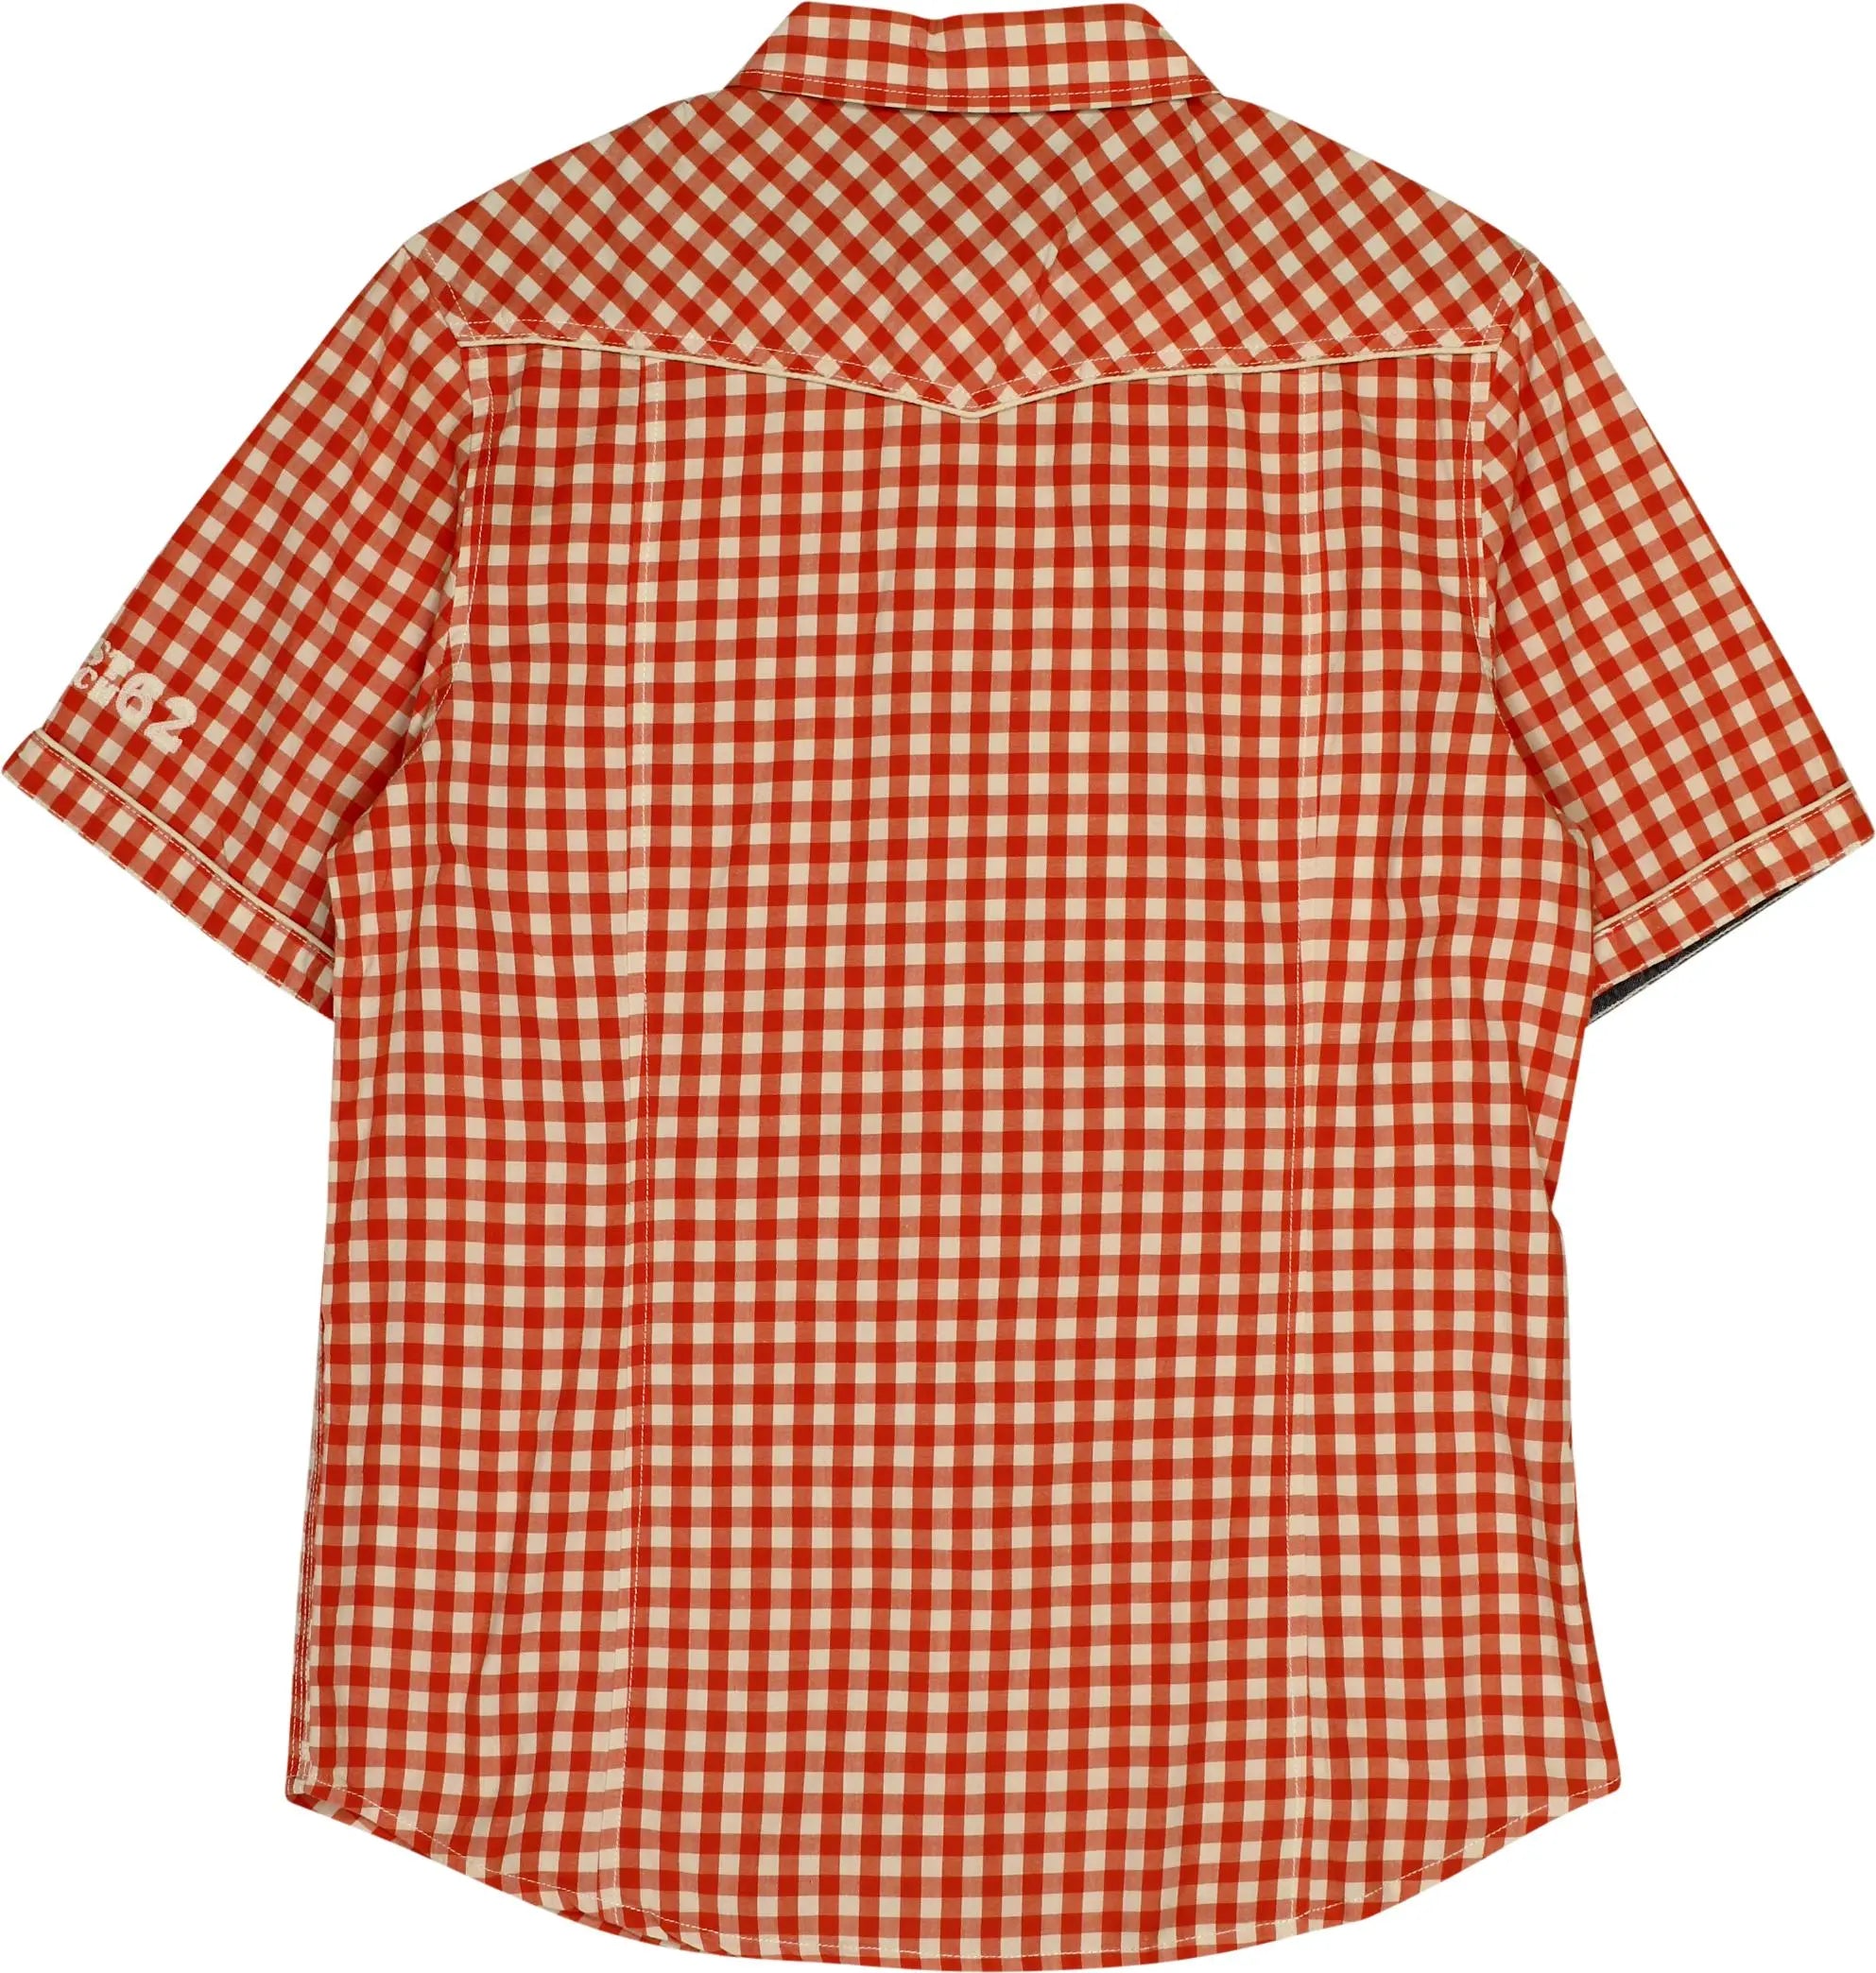 unkown - Orange Checkered Short Sleeve Shirt- ThriftTale.com - Vintage and second handclothing